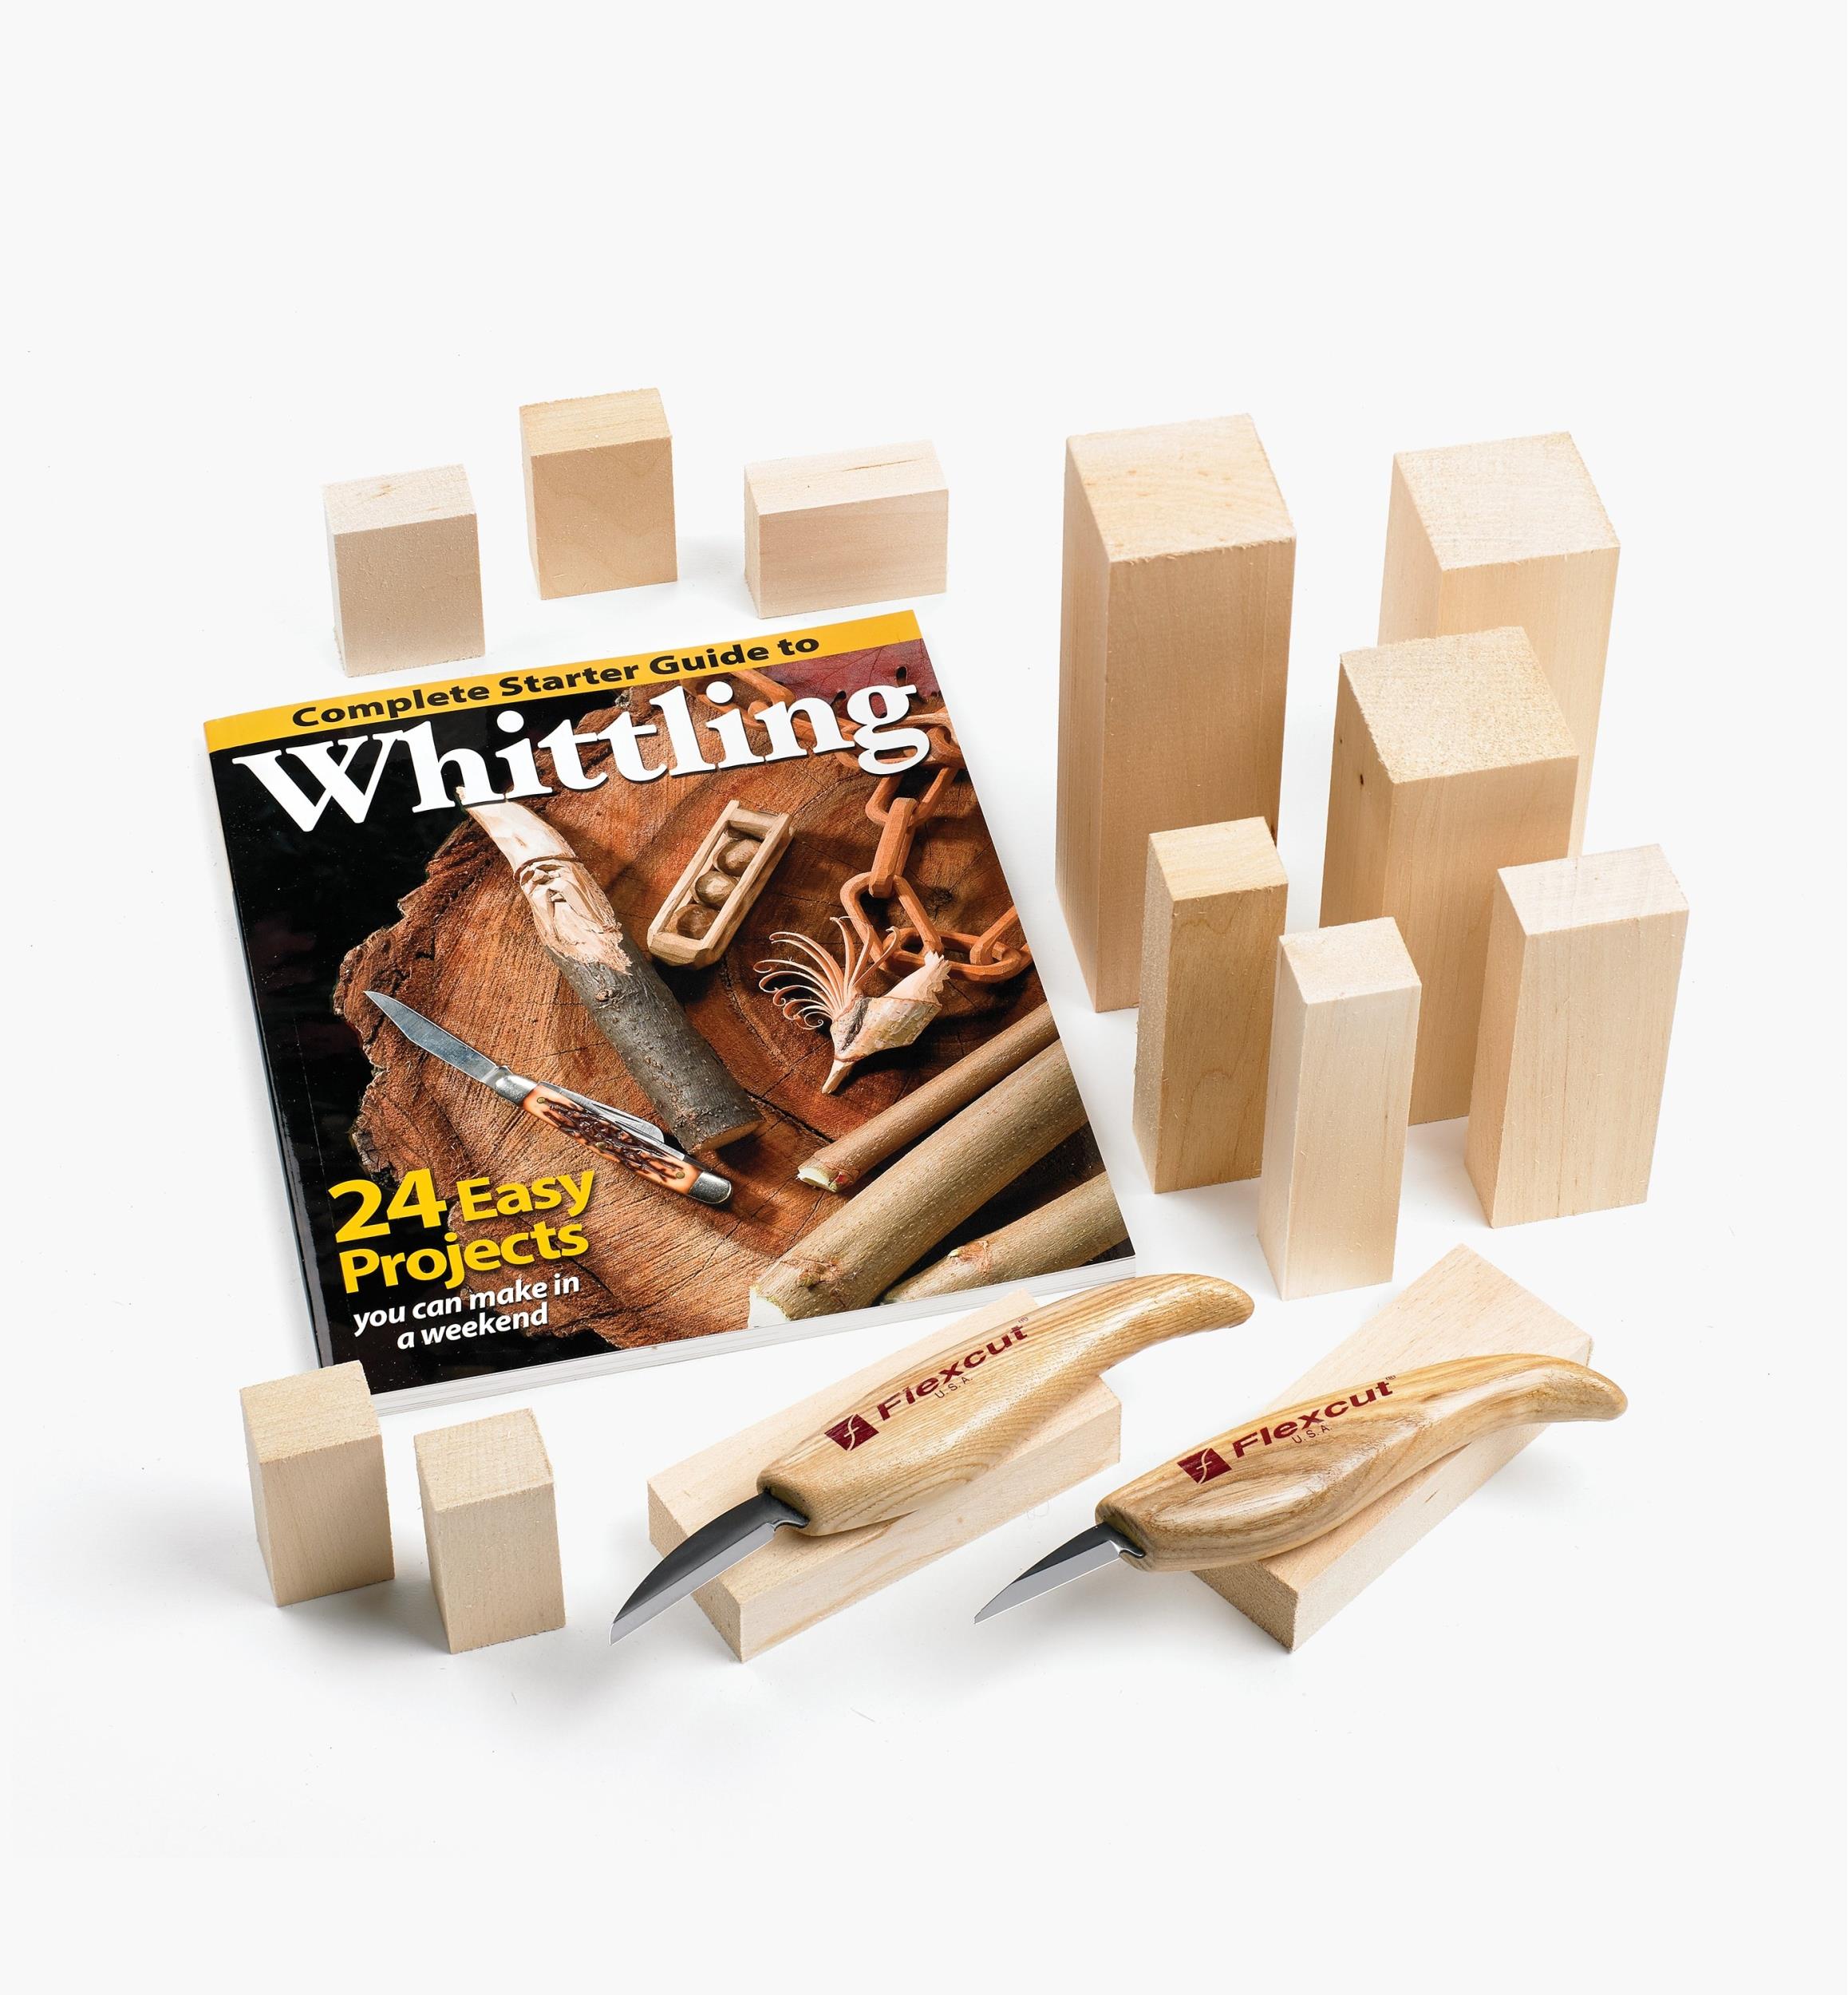 WHITTLING: A COMPLETE STEP-BY-STEP GUIDE eBook by AUSTINE BEN - EPUB Book